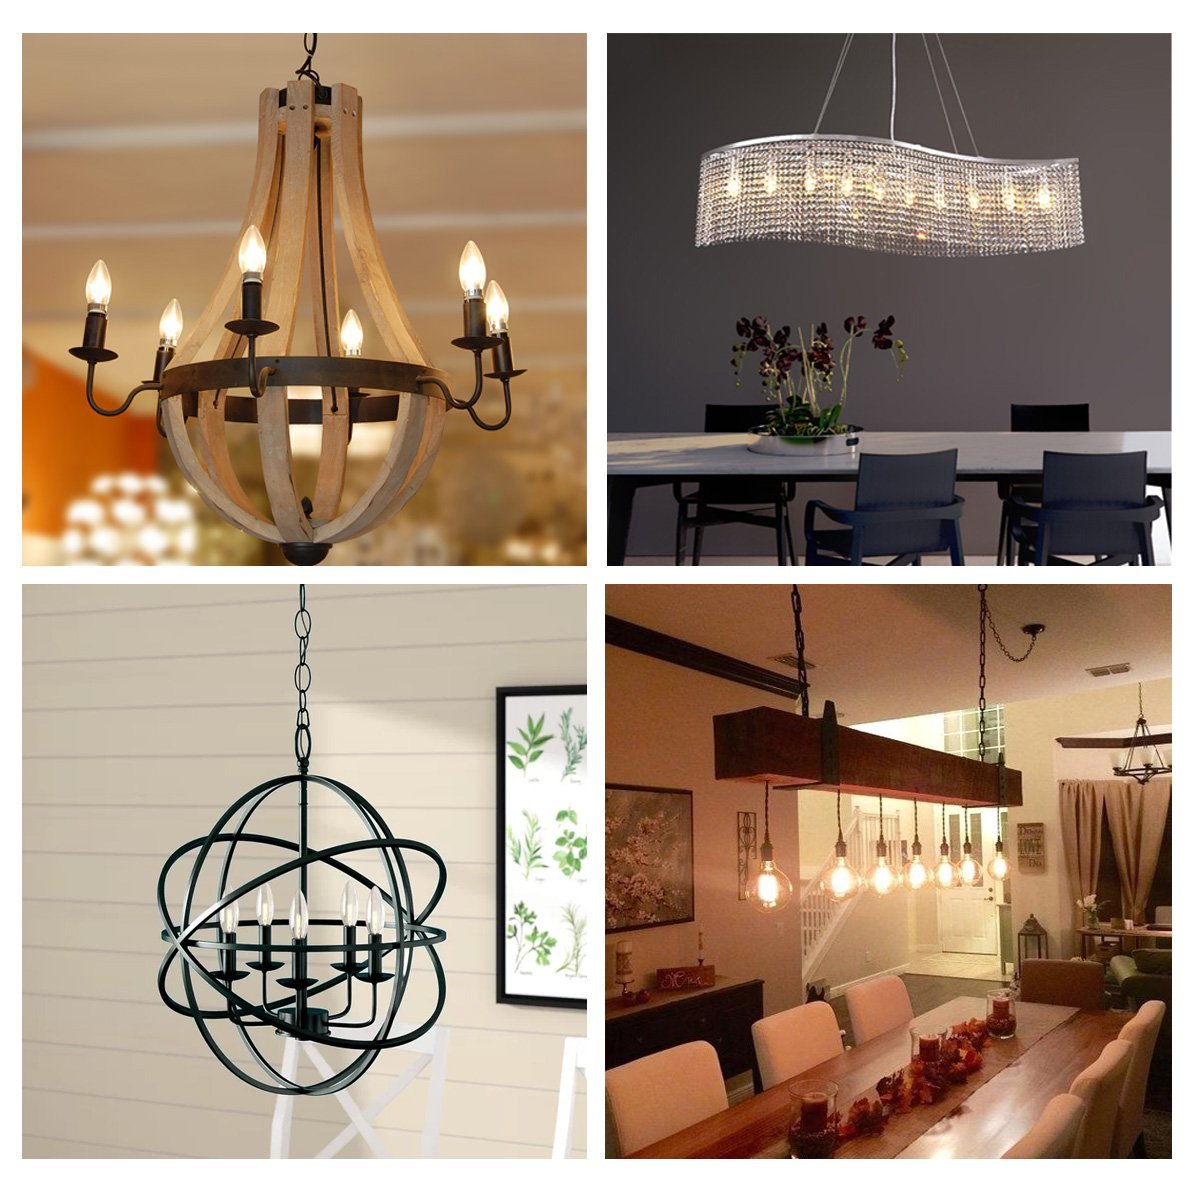 What to look for when choosing a chandelier